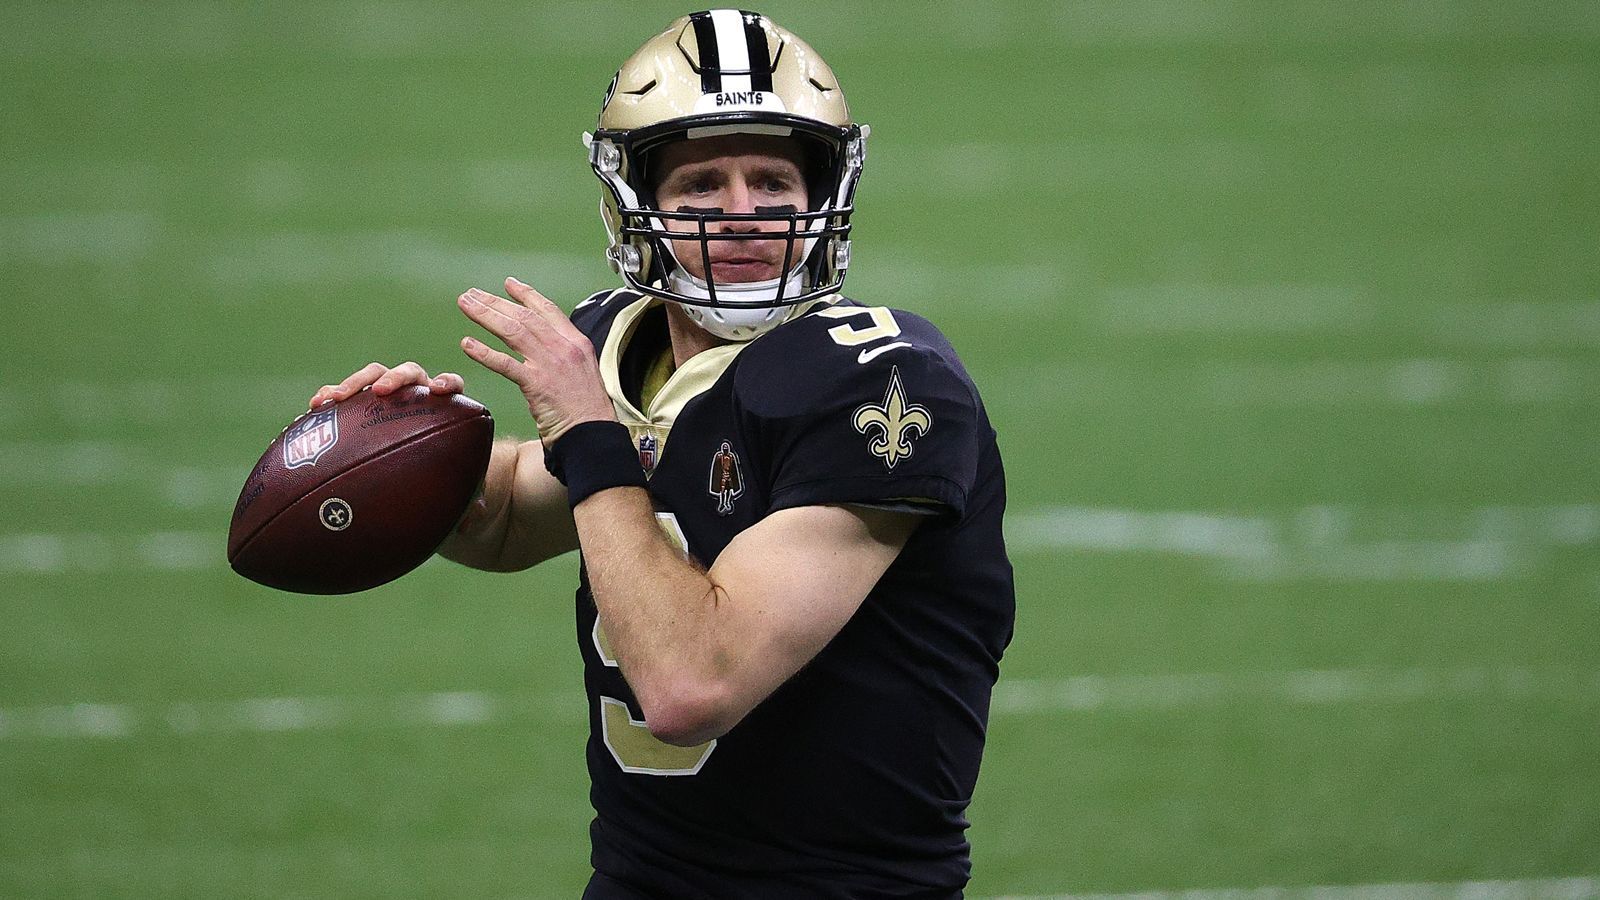 <strong>New Orleans Saints - Drew Brees</strong><br>Passing-Yards: 68.010<br>Passing-Touchdowns: 491<br>Jahre im Team: 15<br>Absolvierte Spiele: 228